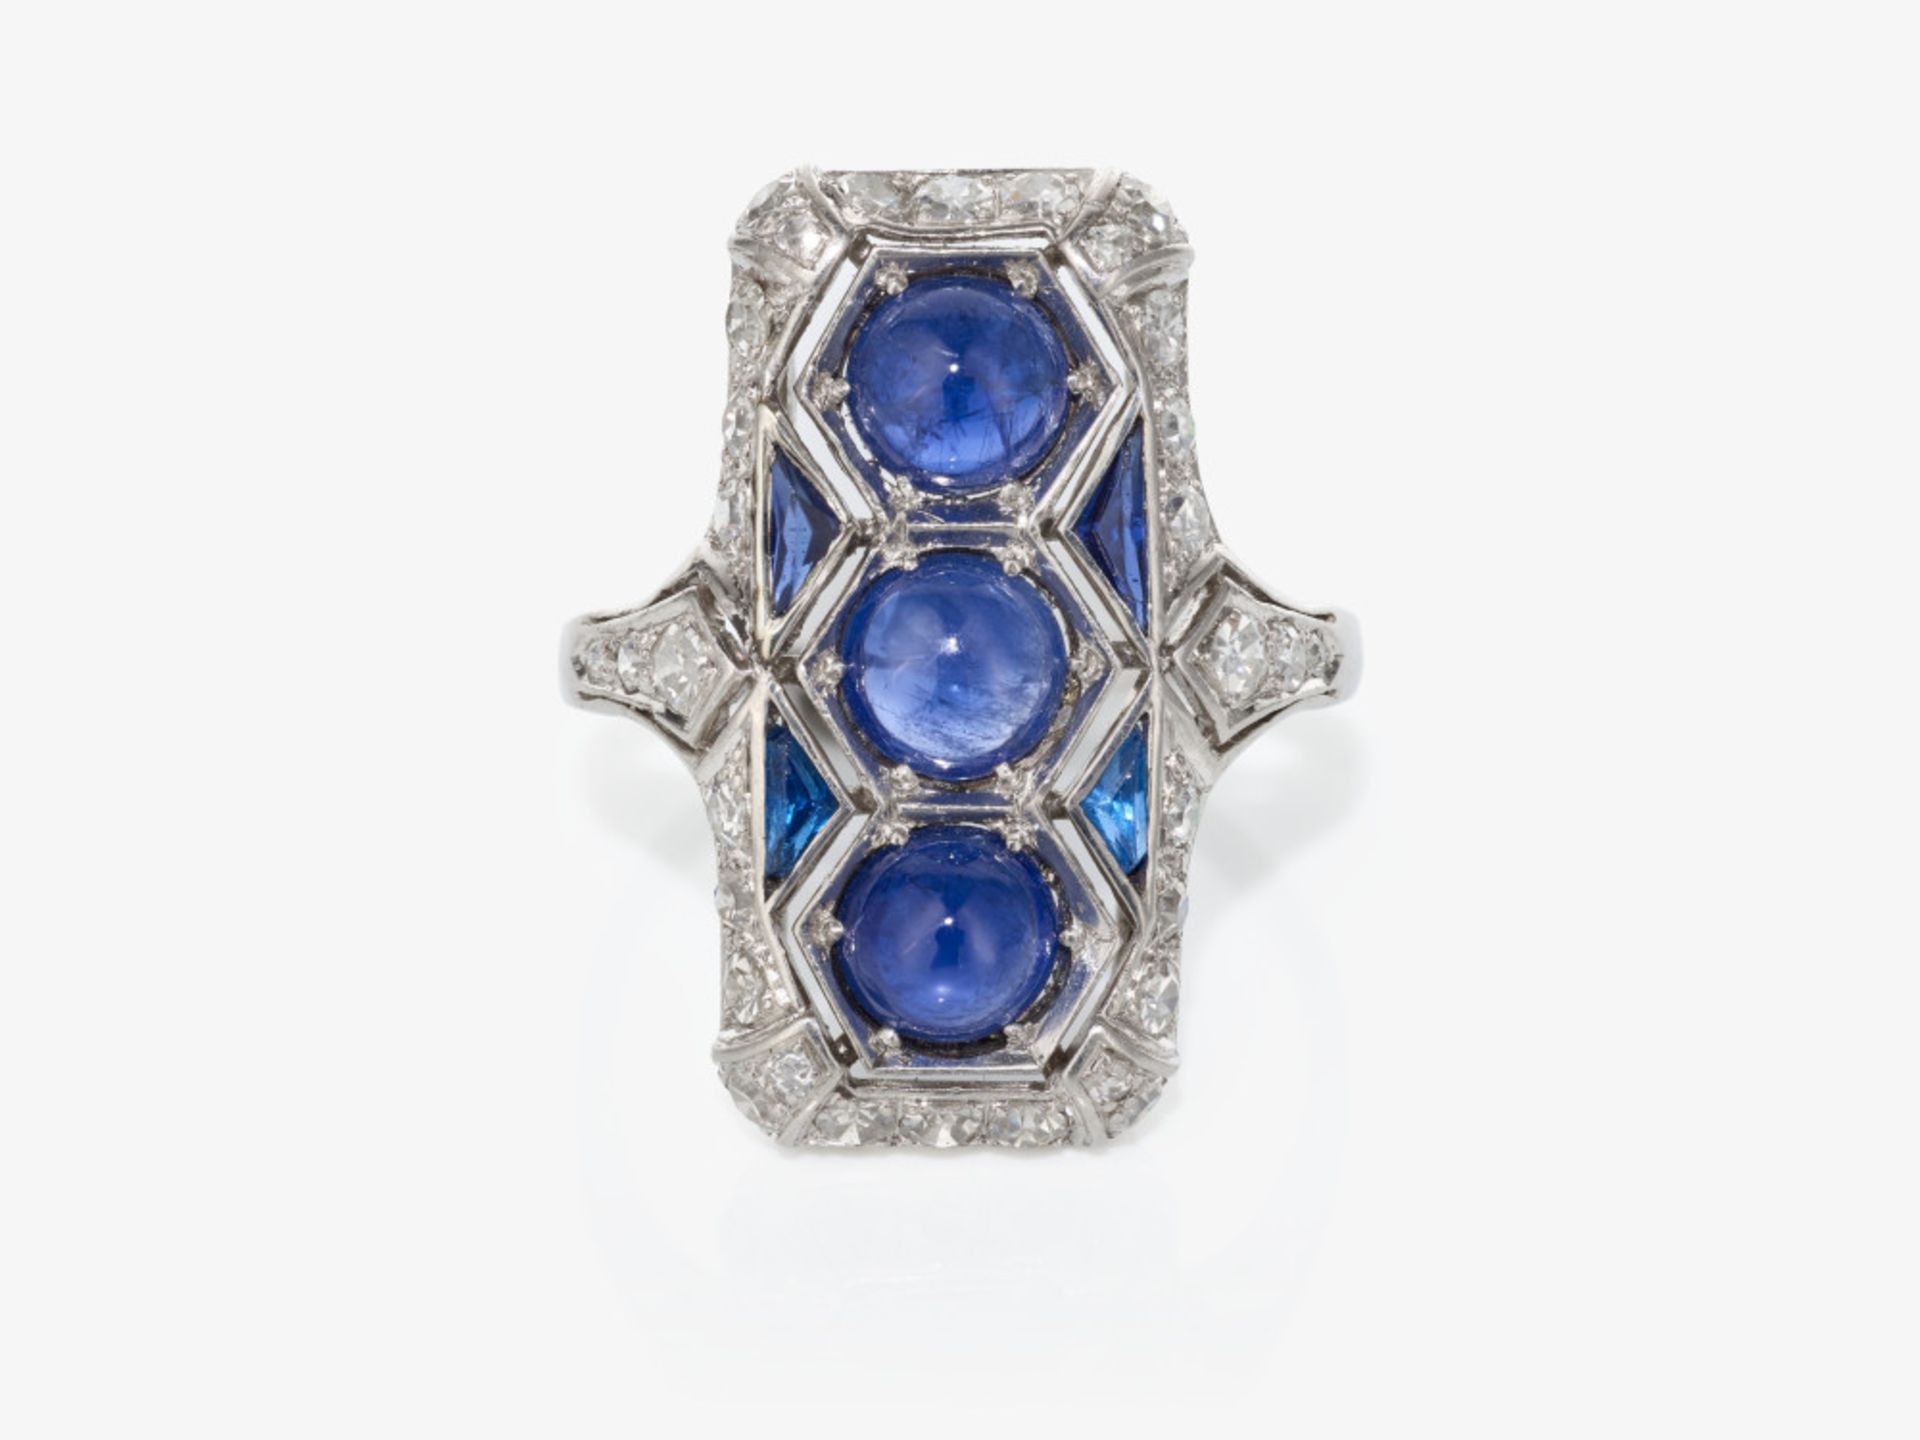 A historical ring decorated with sapphires and diamonds - Image 4 of 4